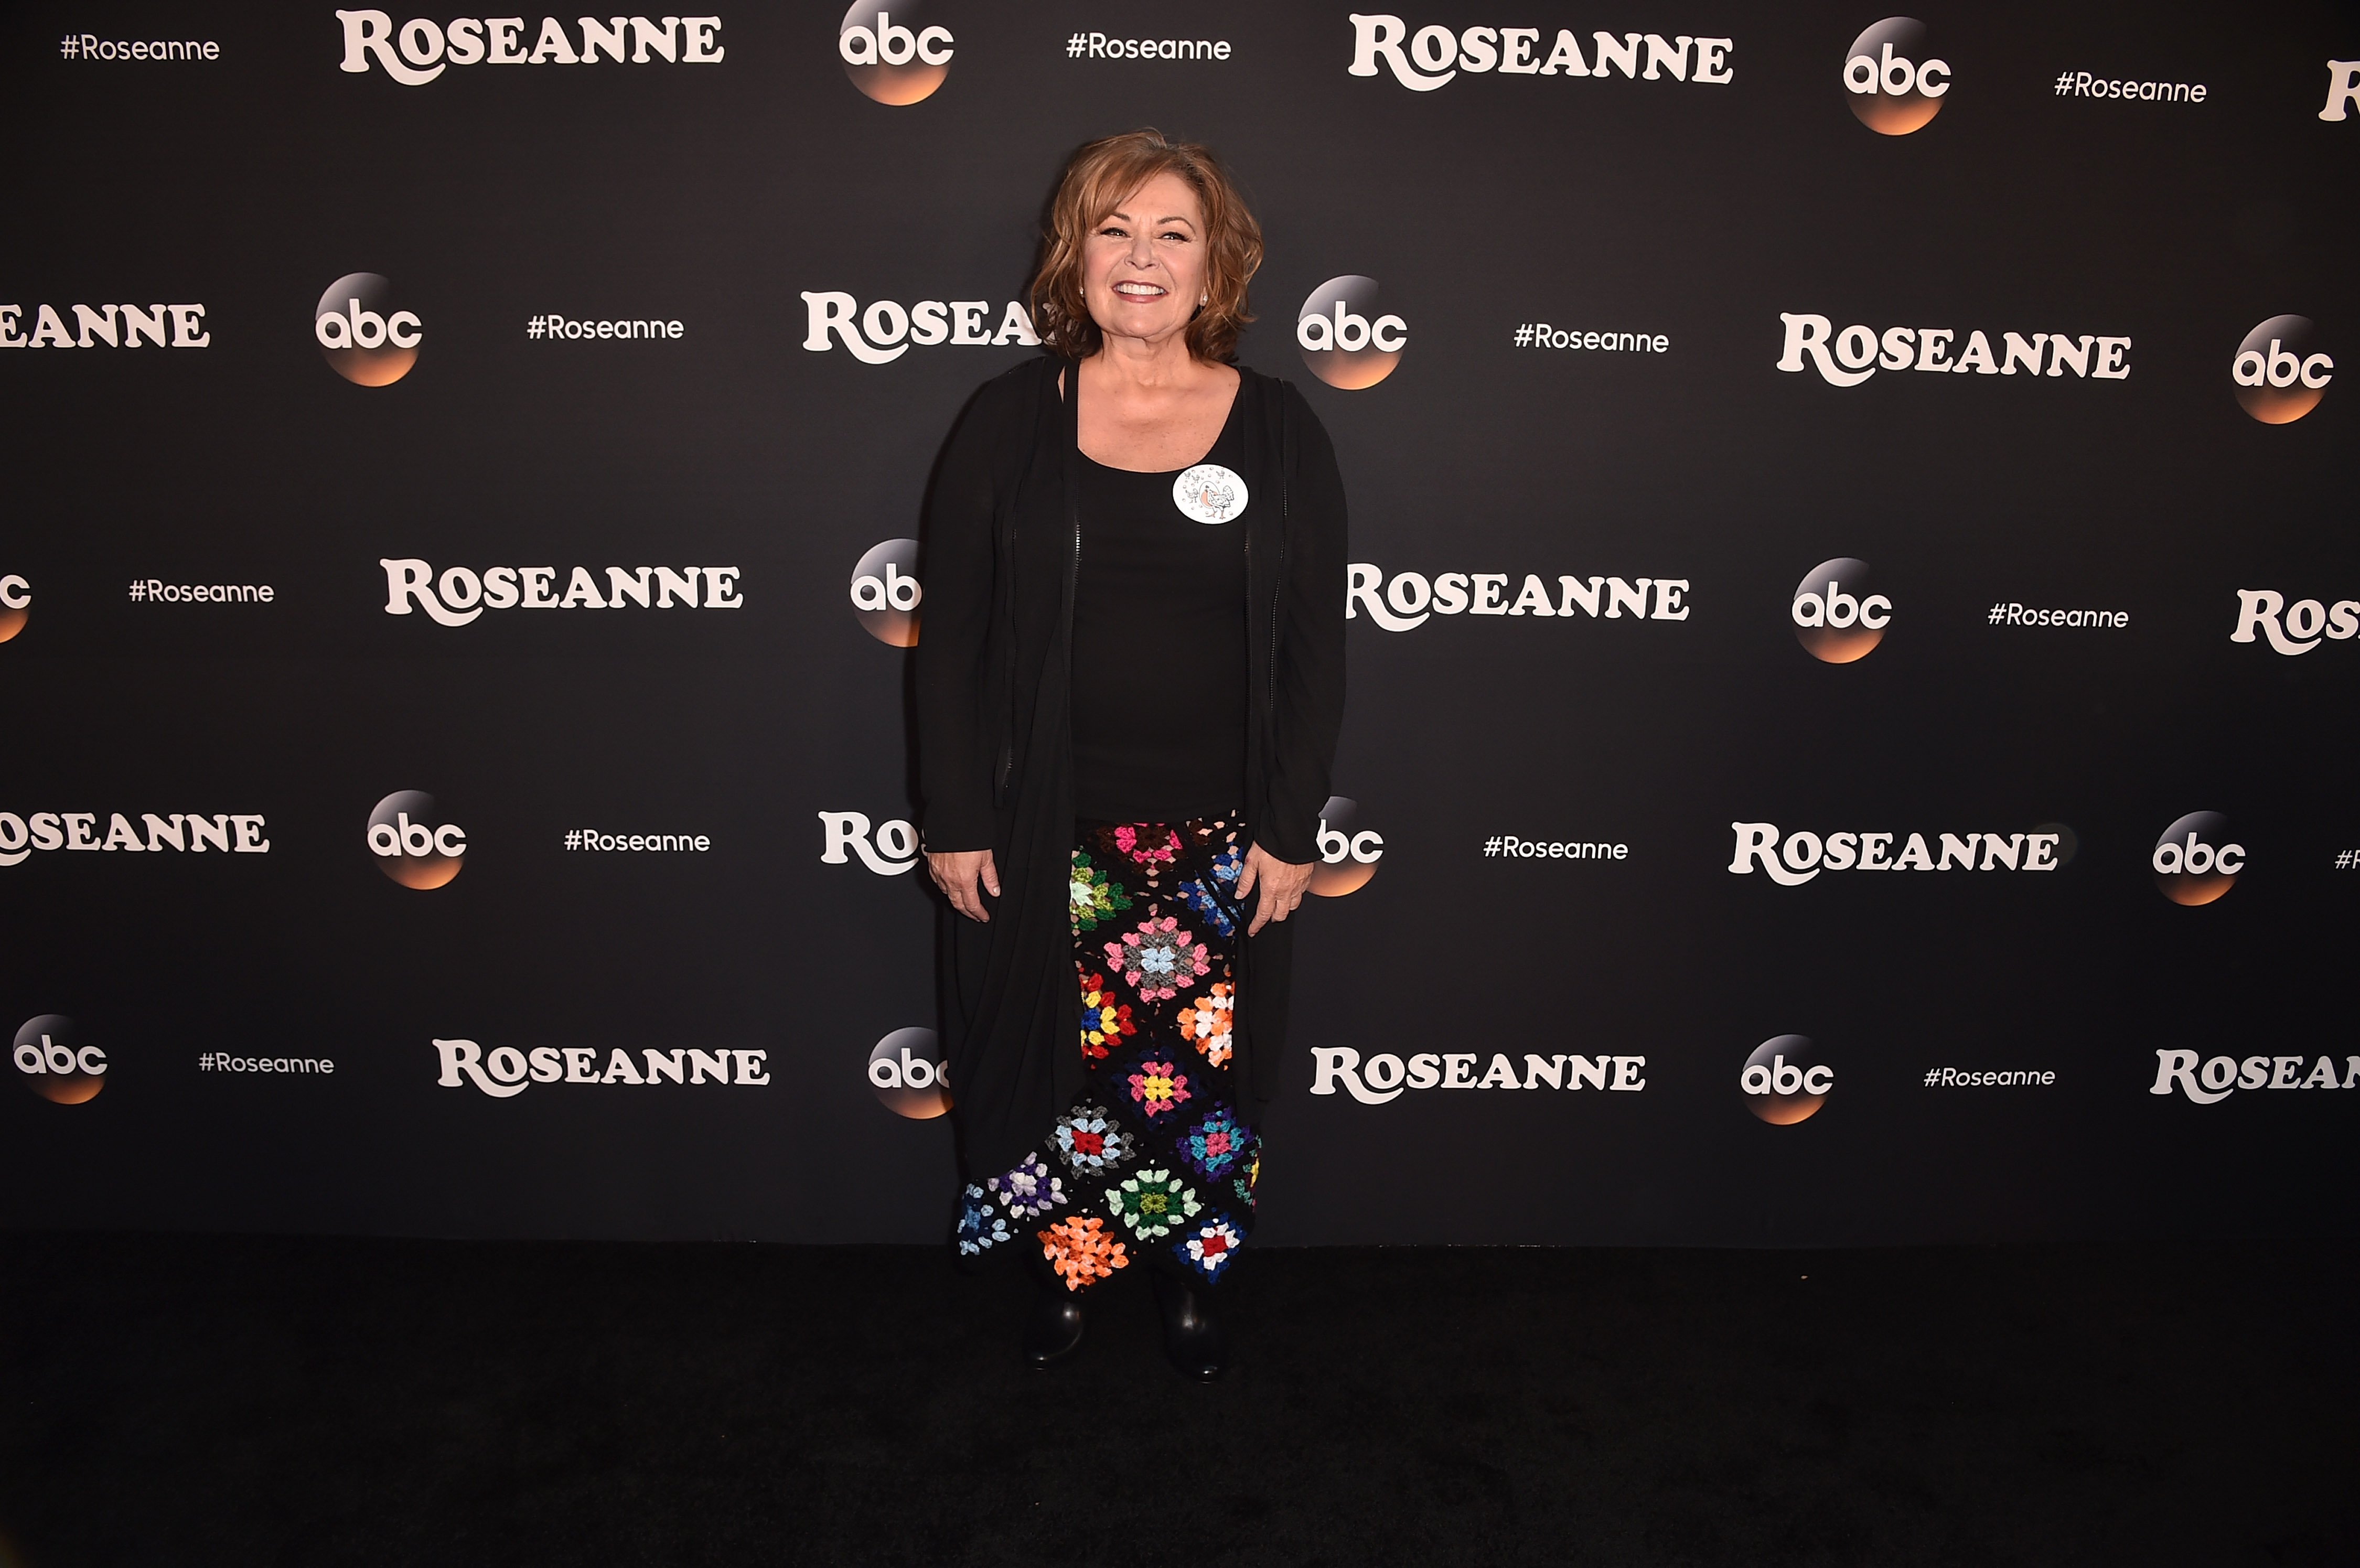 Roseanne Attends ABC's Roseanne Event | Source: Getty Images